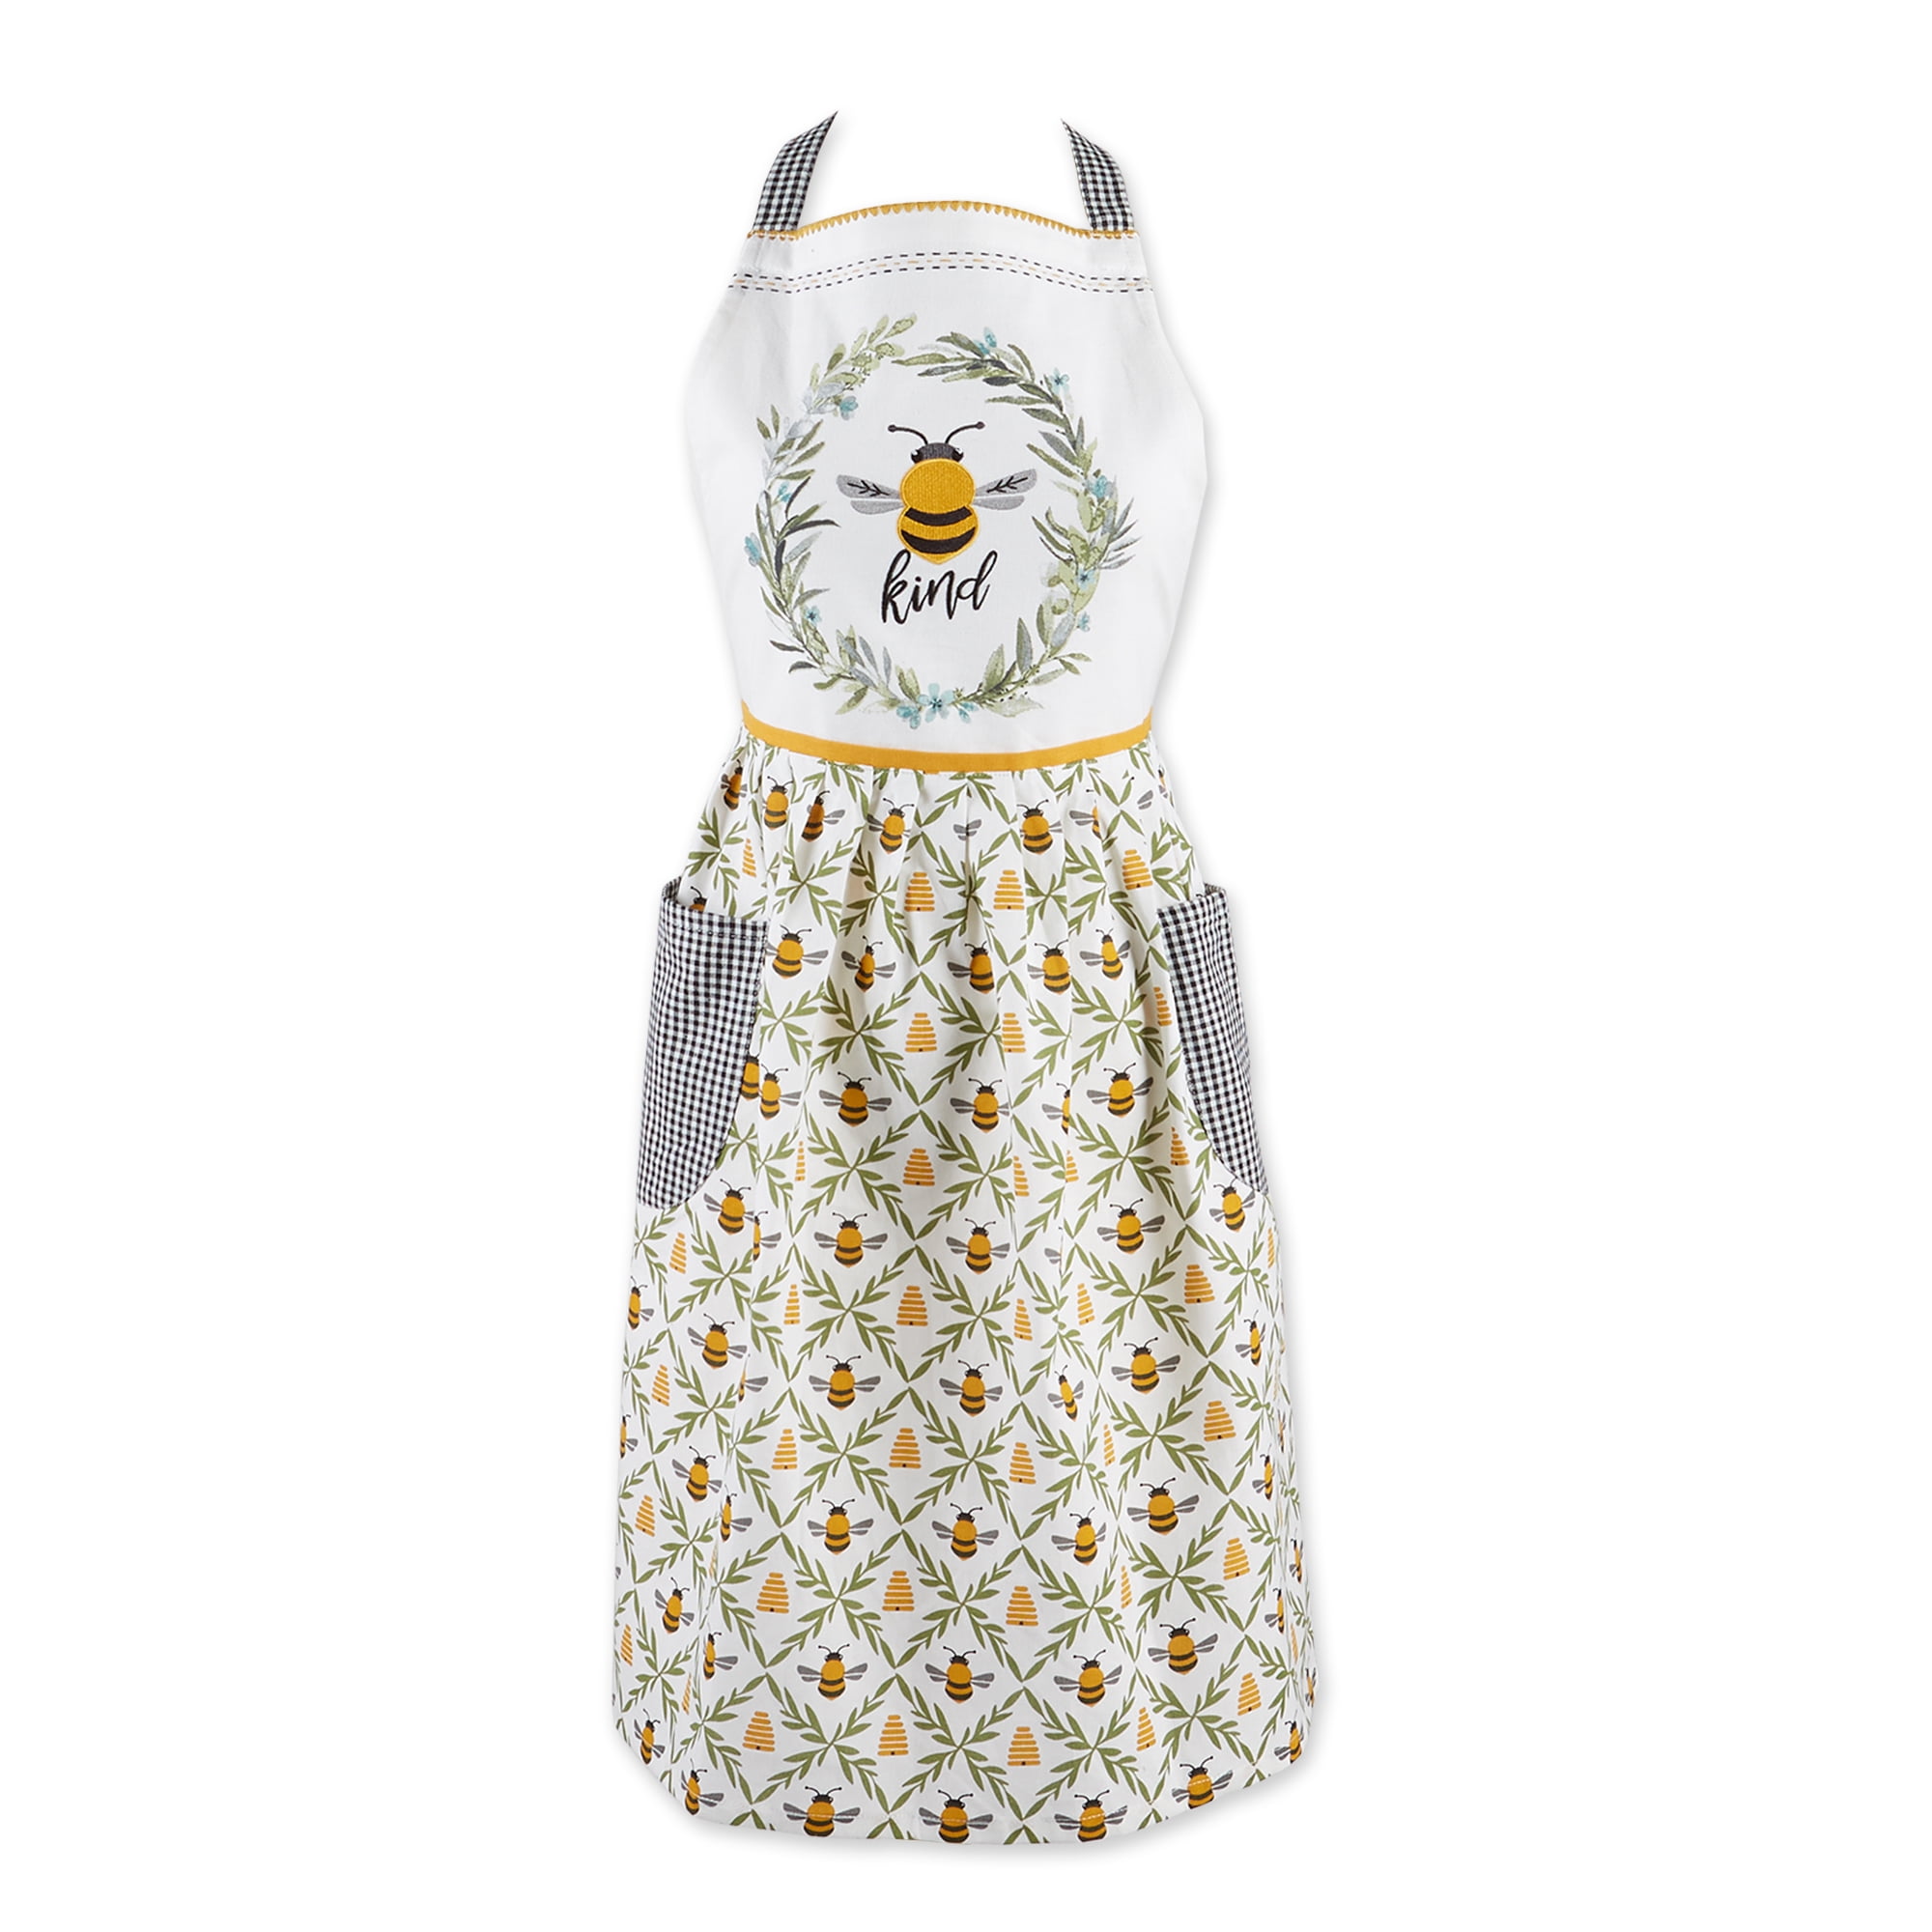 Picture of Design Imports 753414 Apron with Pocket - Bee Kind